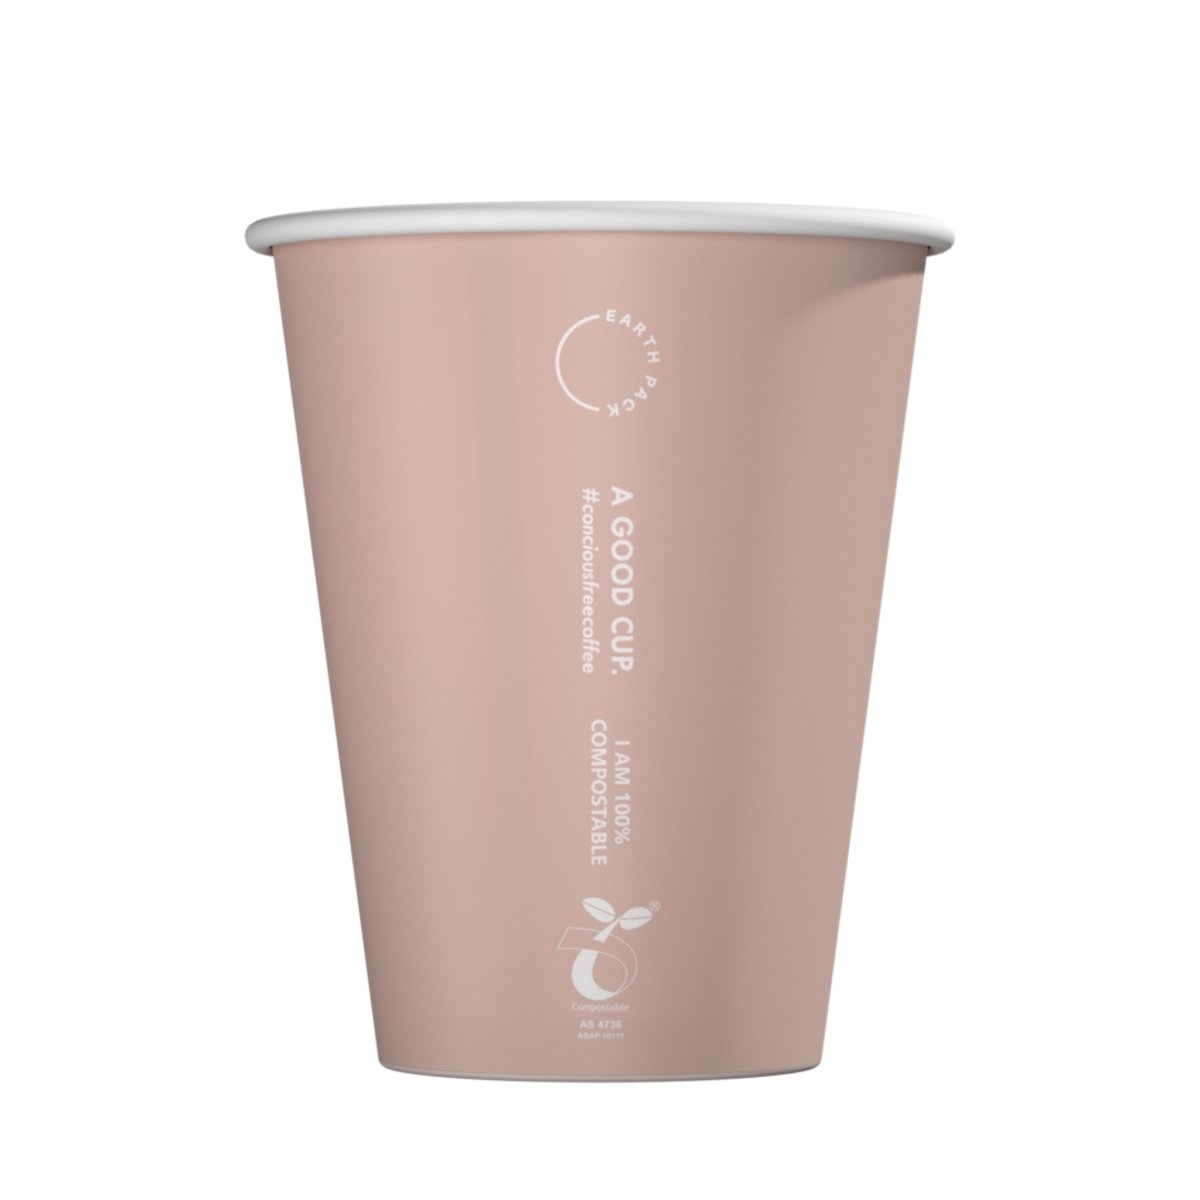 Pastel Pink 16oz eco-friendly compostable coffee cup